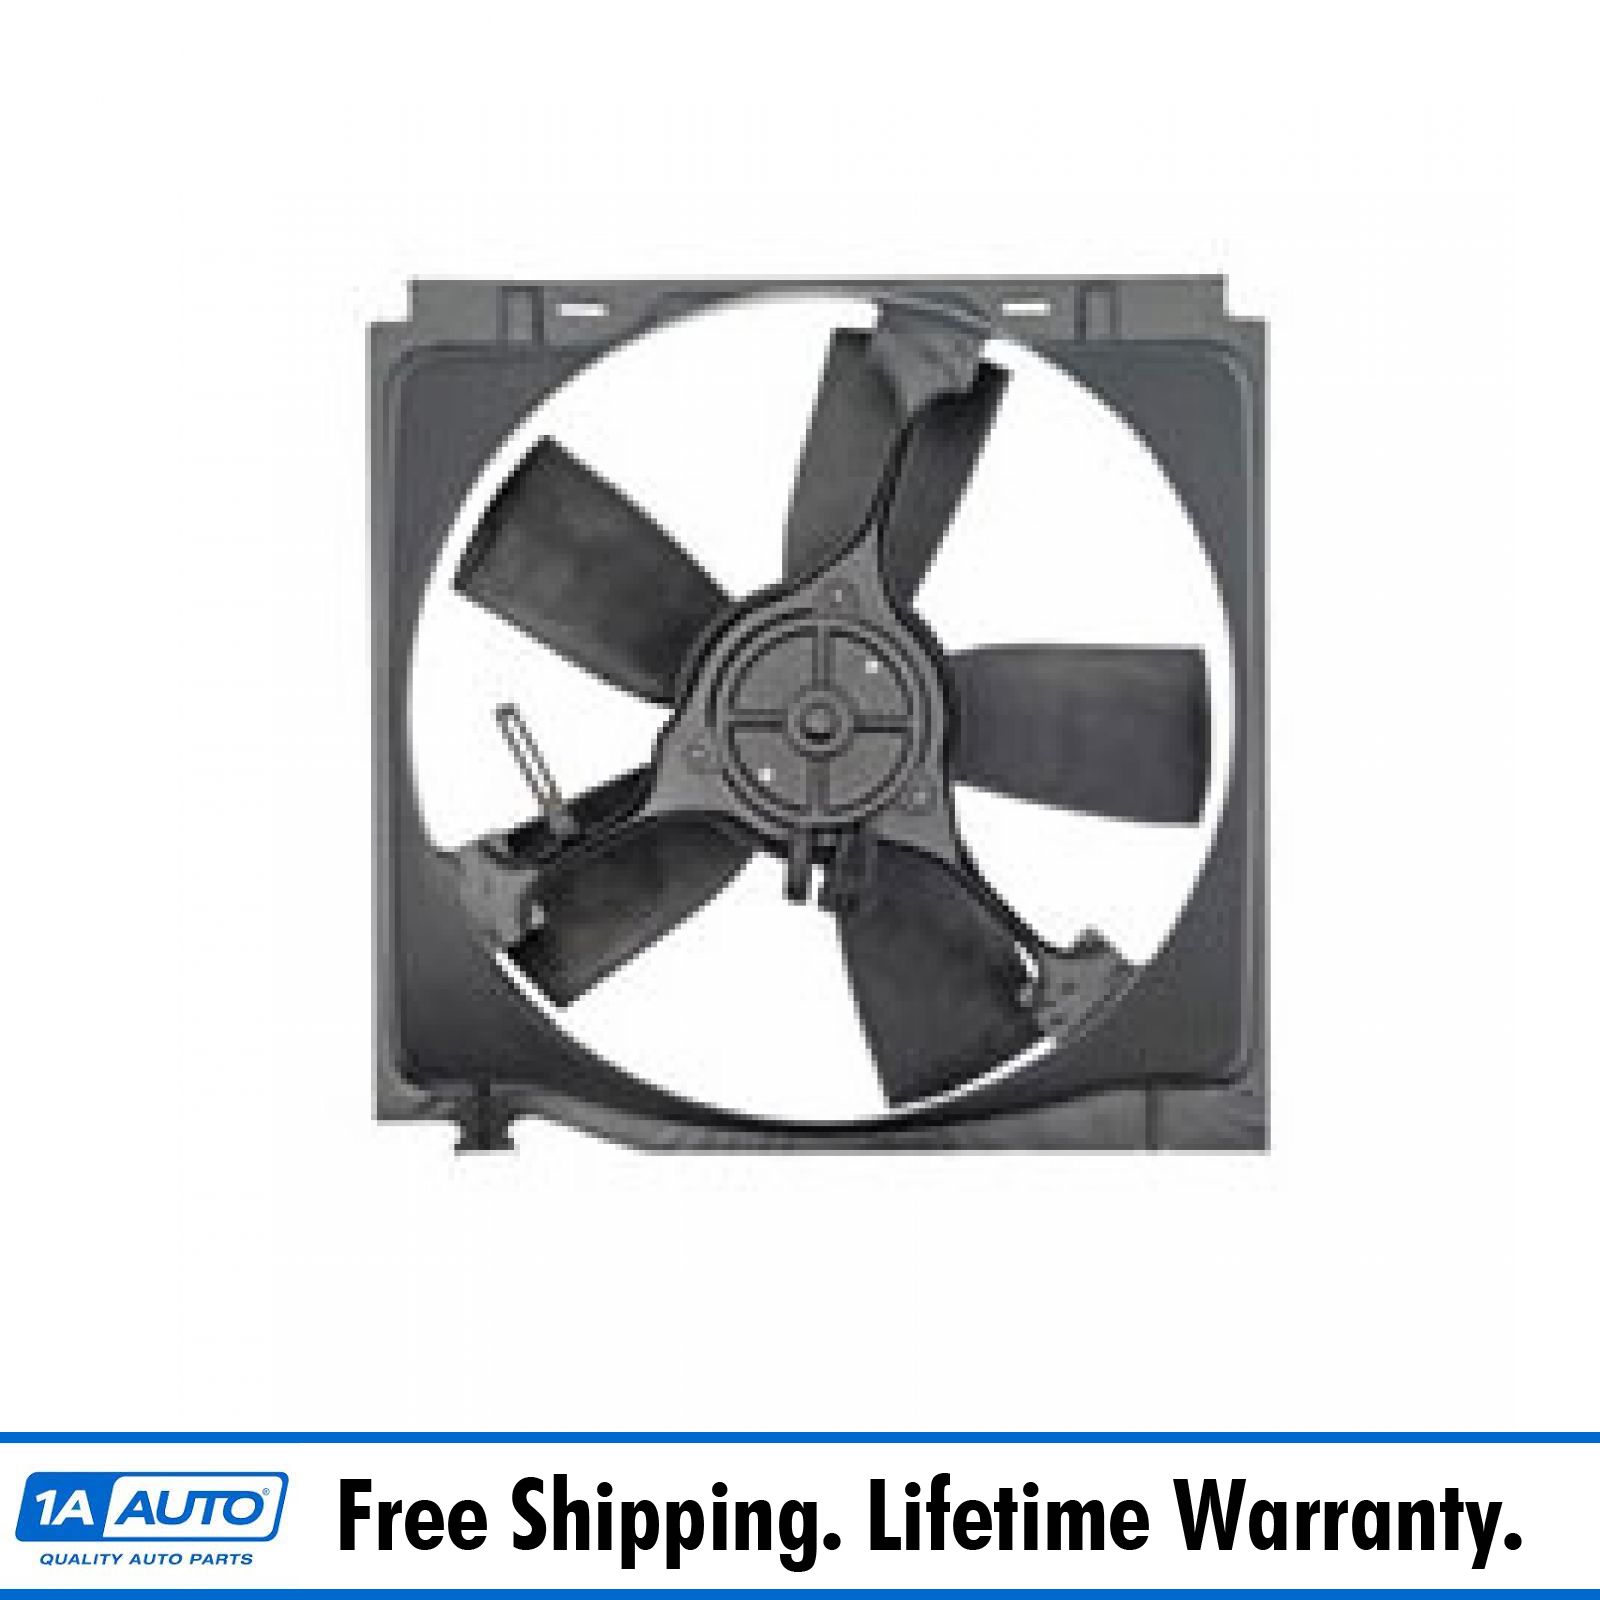 Radiator Cooling Fan Motor Blade & Shroud Assembly for 04-08 Mazda RX-8 RX8 